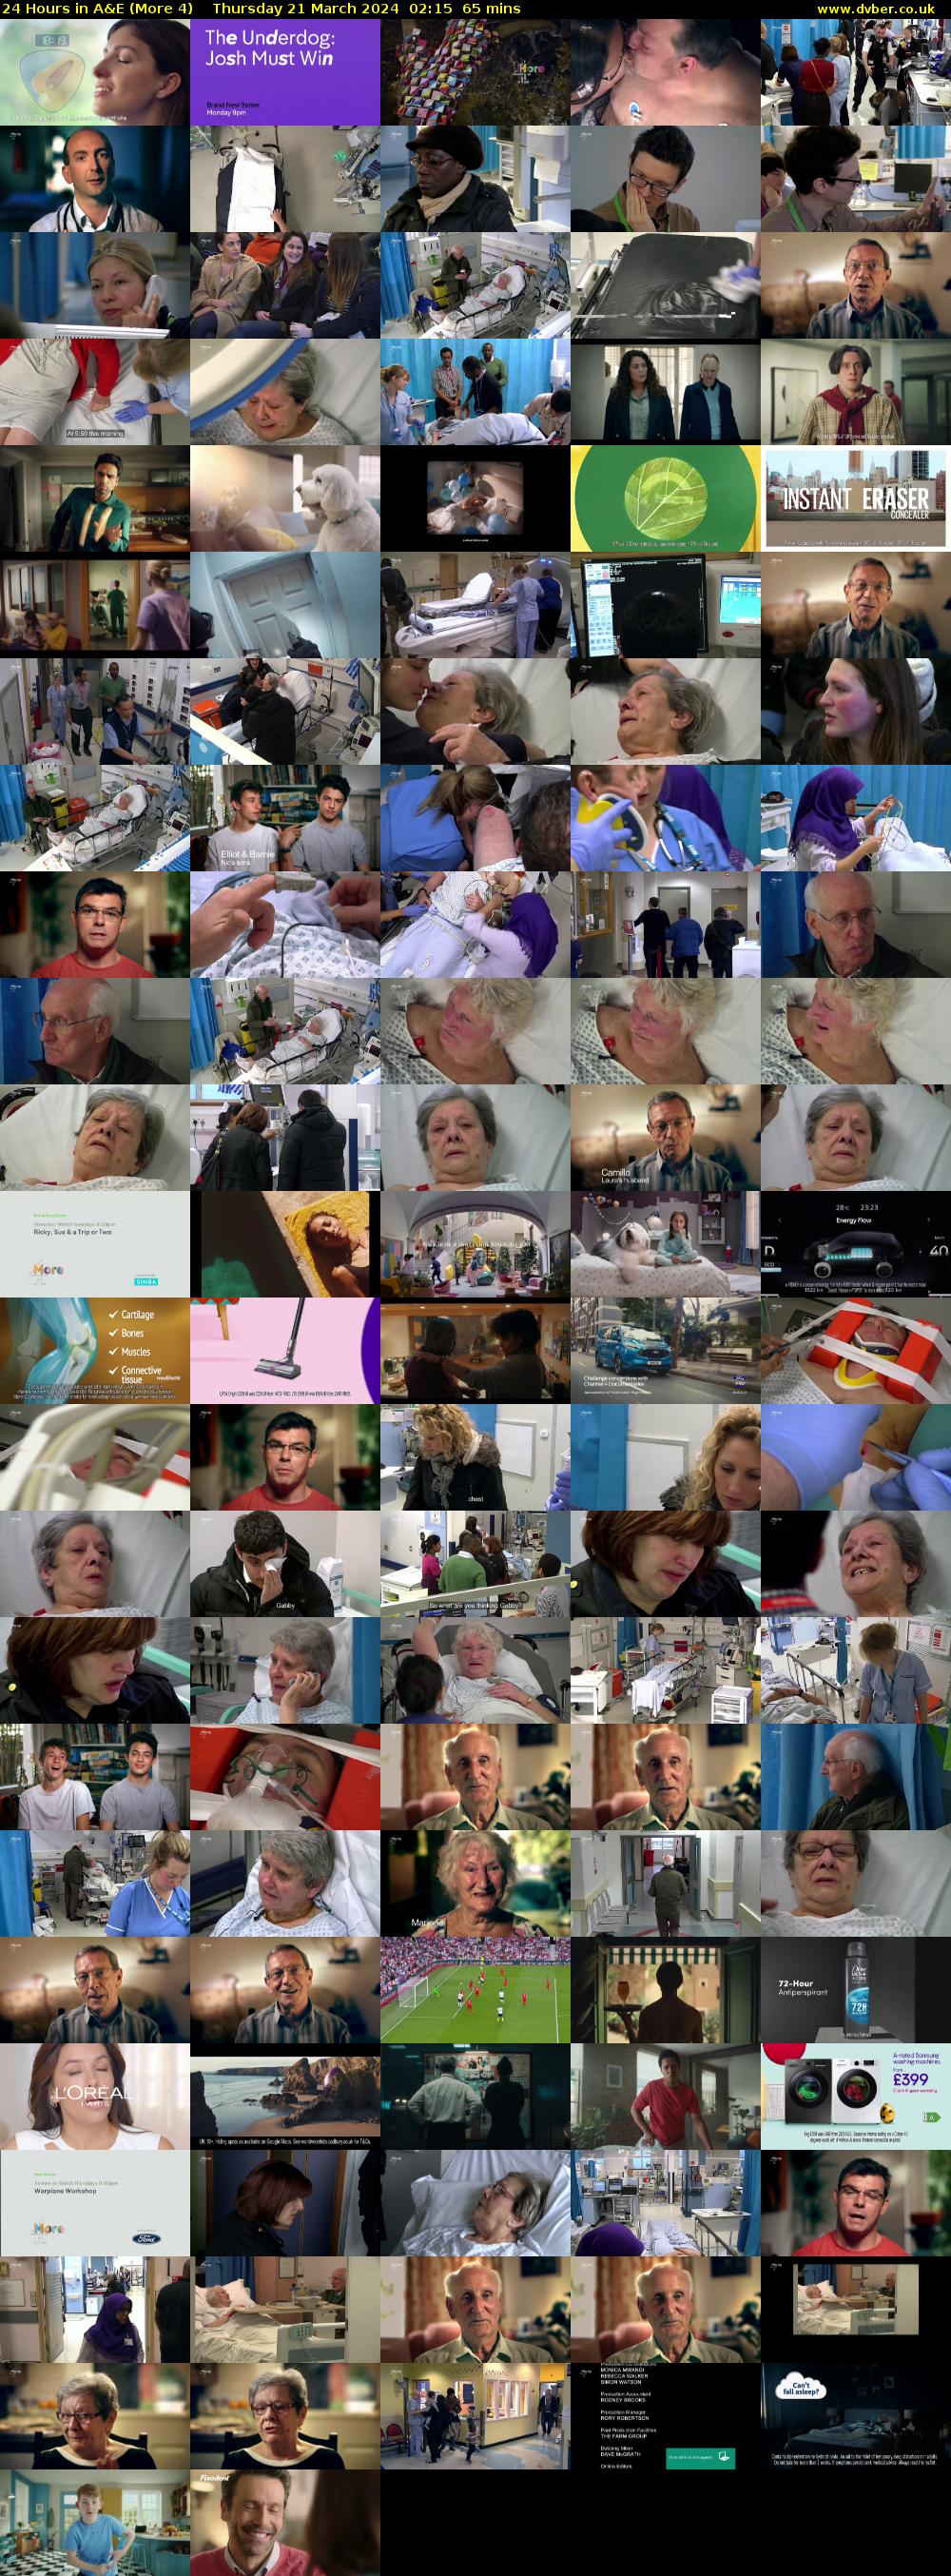 24 Hours in A&E (More 4) Thursday 21 March 2024 02:15 - 03:20